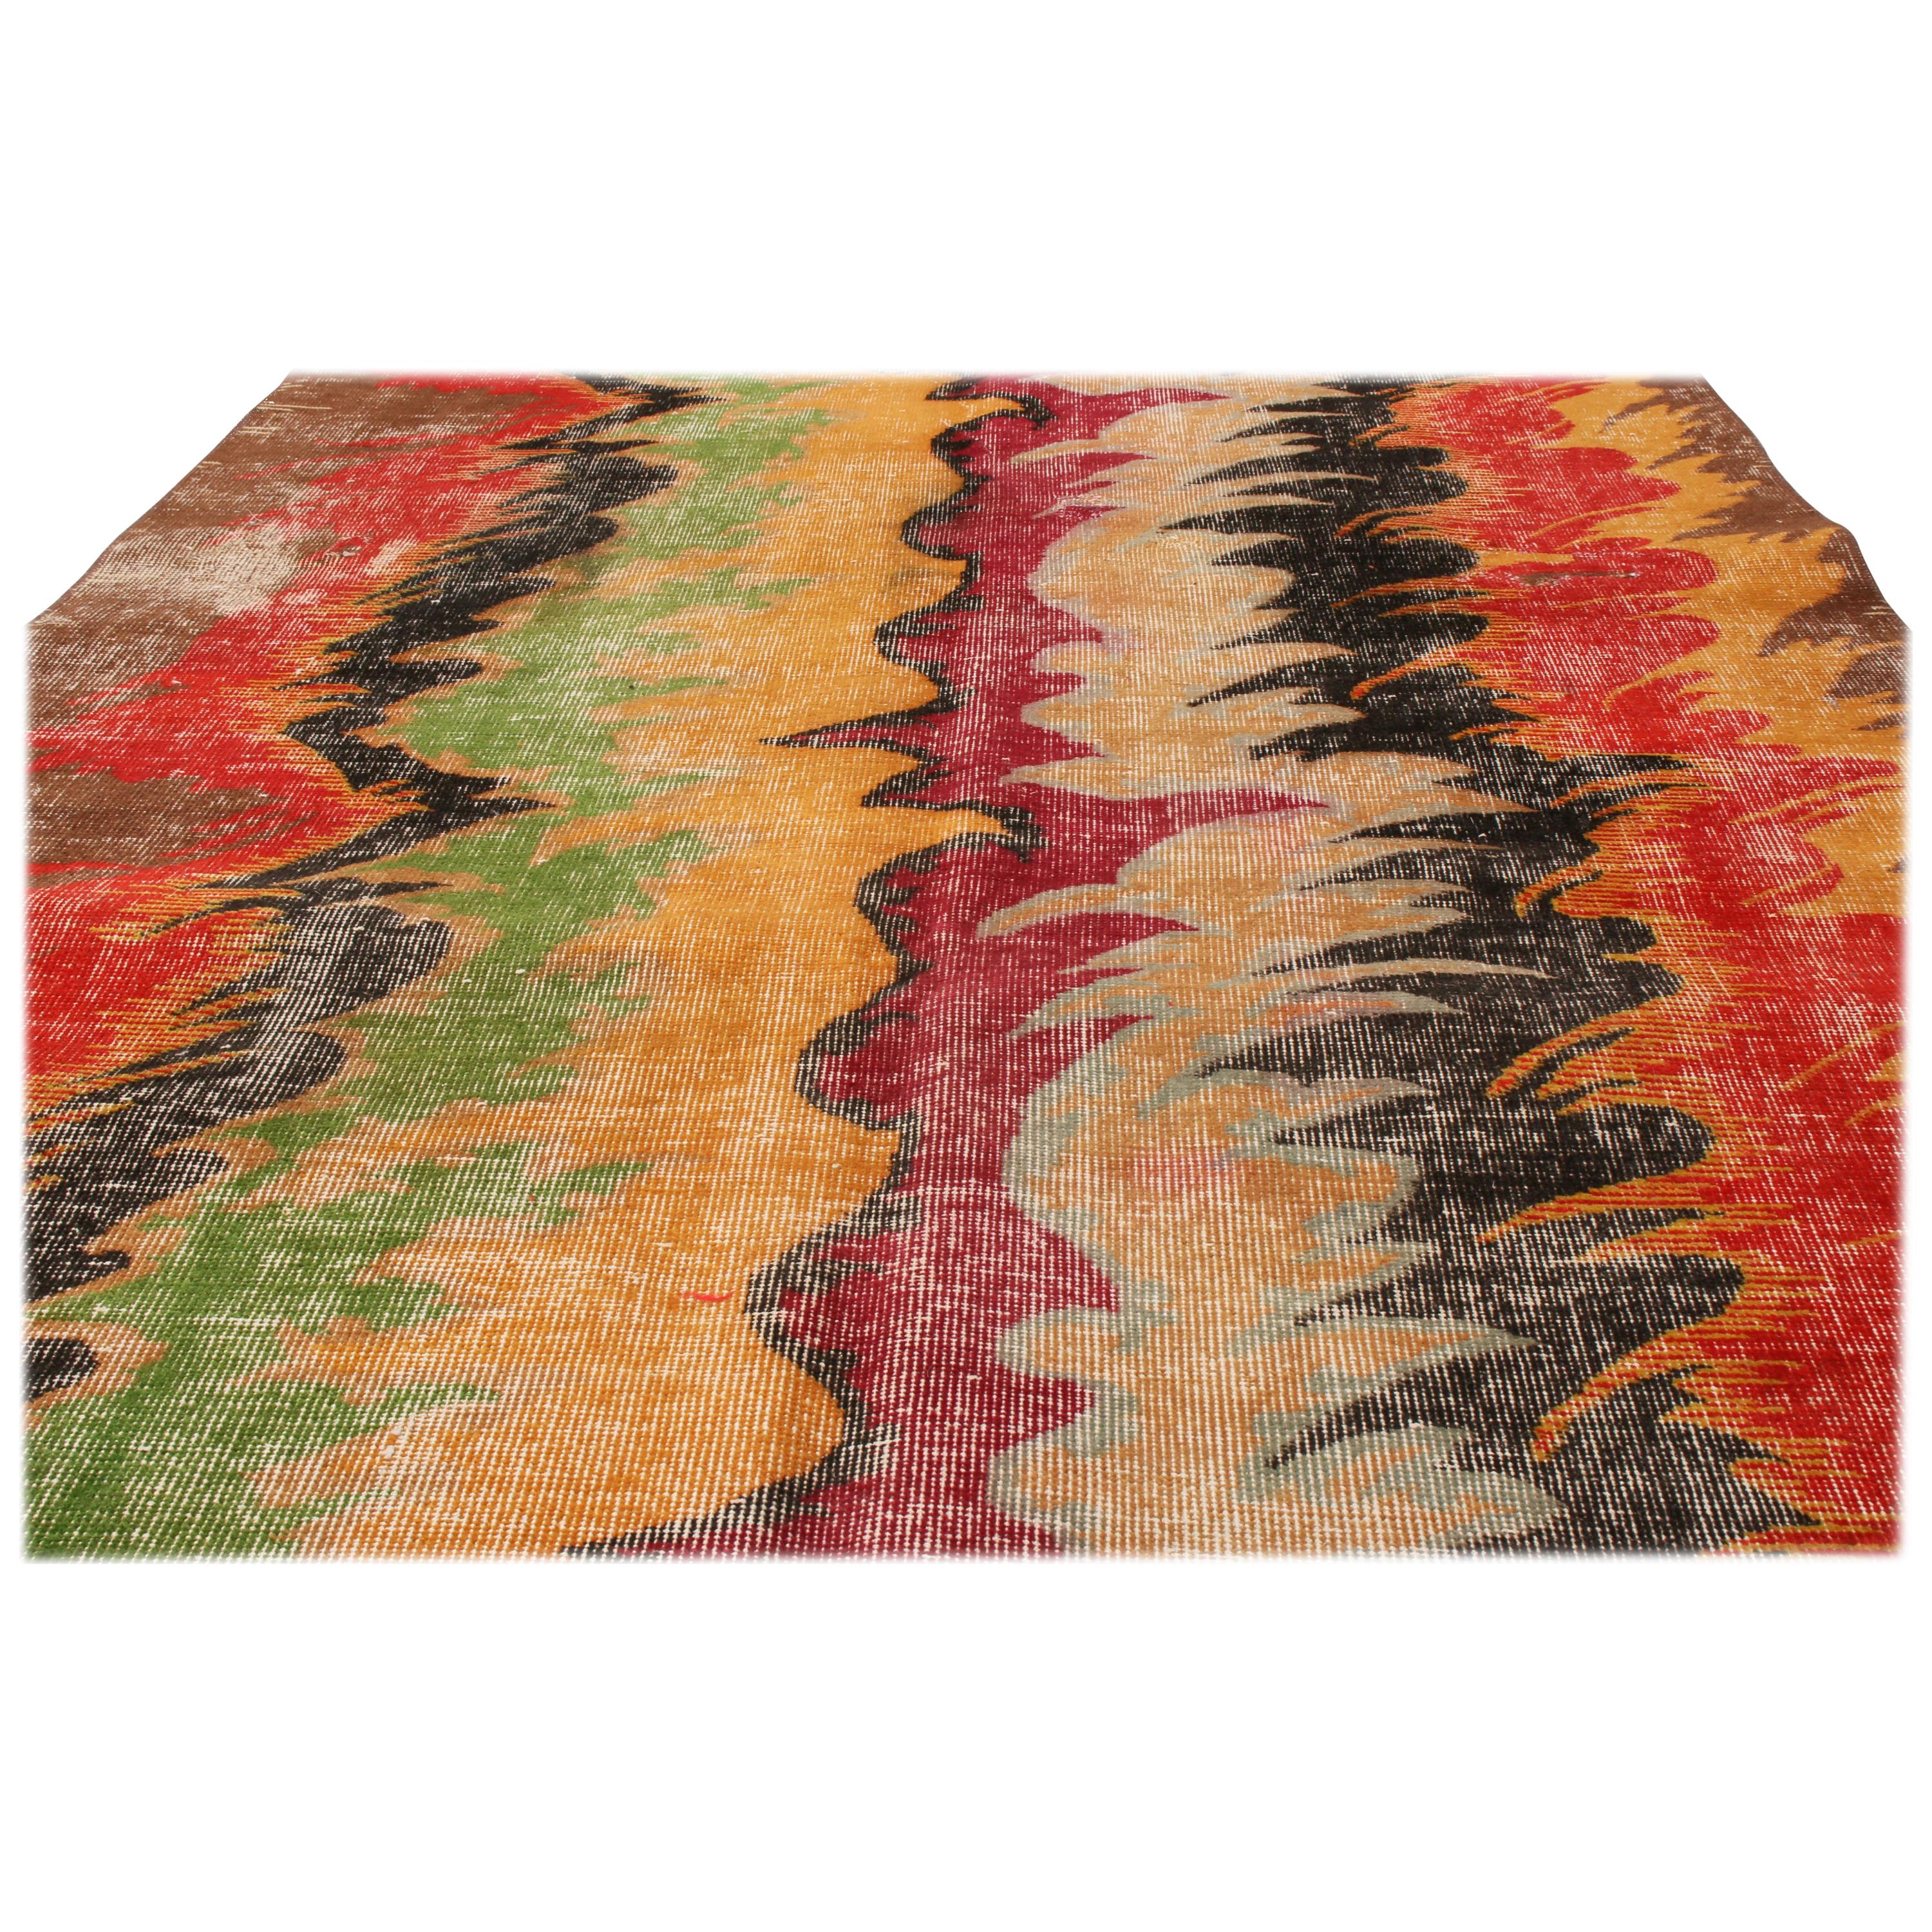 Originating from Turkey, this contemporary geometric rug is hand knotted in high quality wool, paying homage to an iconic signature Turkish family of midcentury rug designs. Featuring a borderless, column-based all-over field design, the contrast of